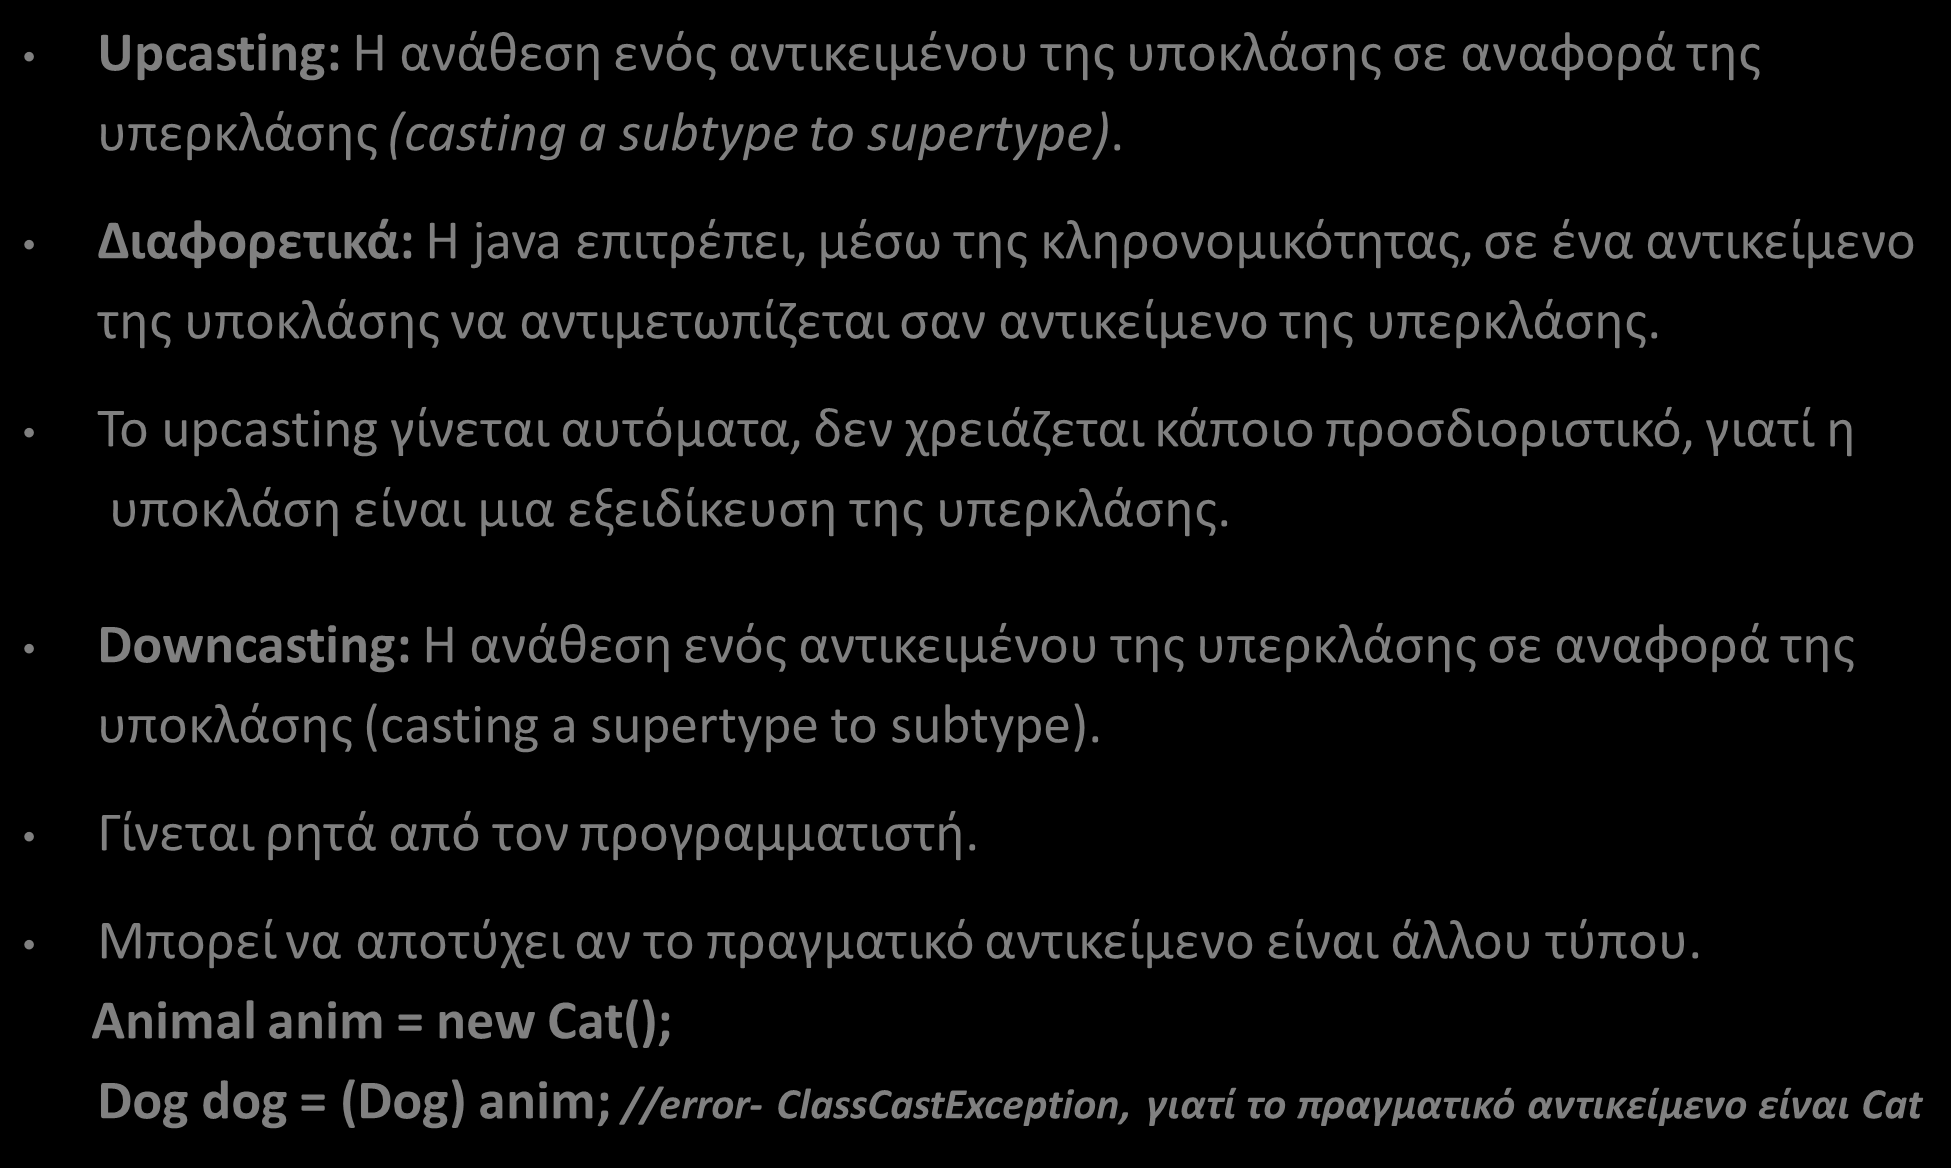 Upcasting Downcasting (1/9) Upcasting: Η ανάθεση ενός αντικειμένου της υποκλάσης σε αναφορά της υπερκλάσης (casting a subtype to supertype).